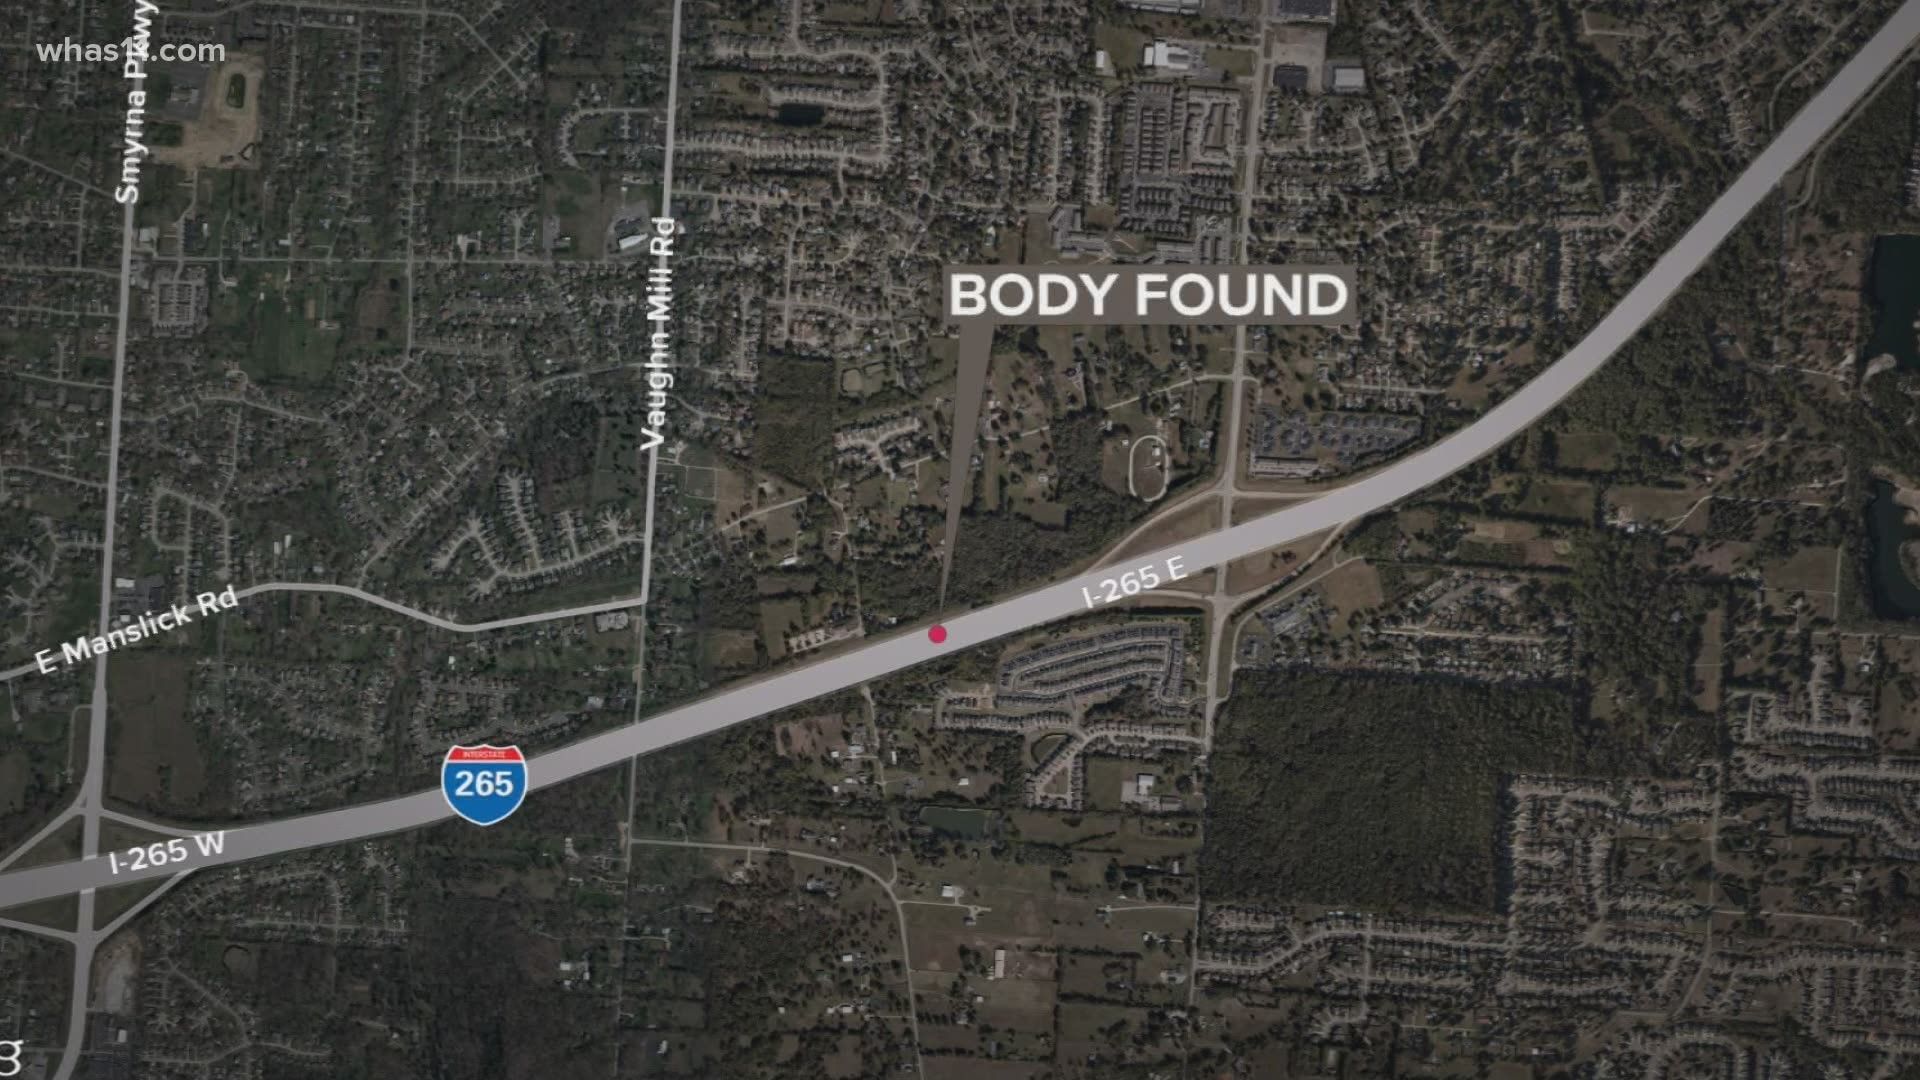 Police are investigating after a body was found following a car fire near Beulah Church Road on I-265 early Sunday.